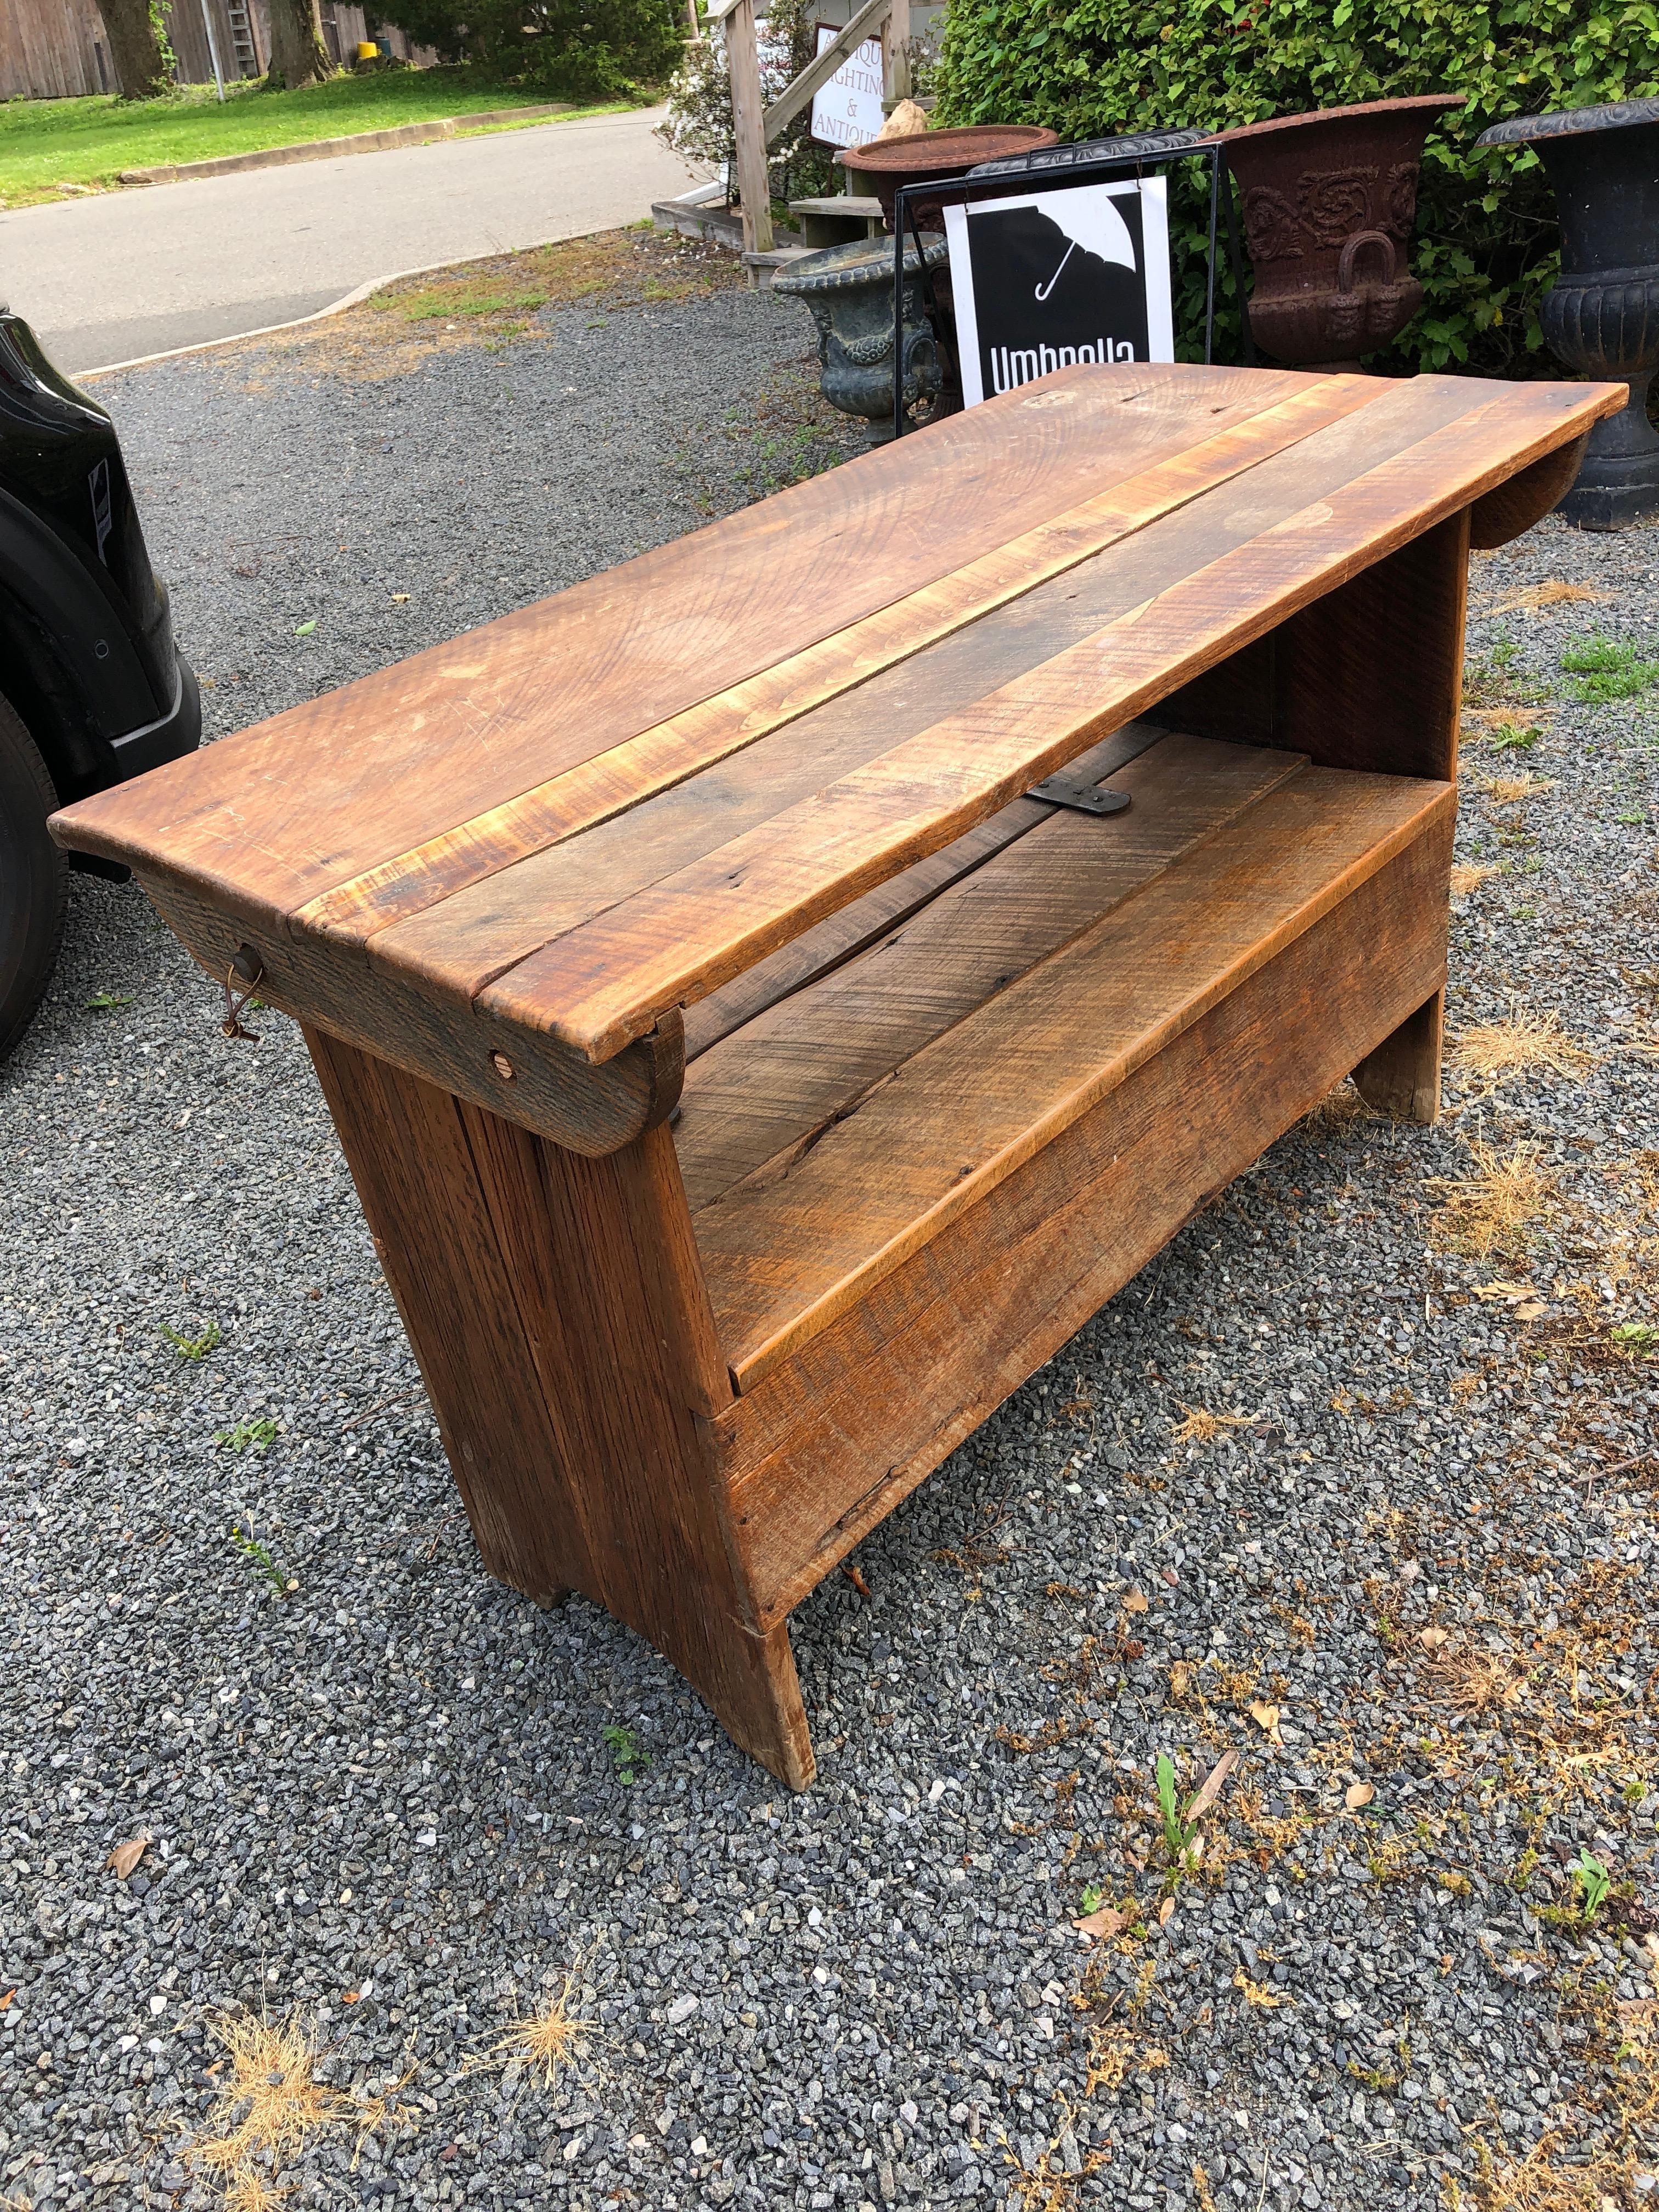 An antique rustic multi use pine table hutch that functions both as a table in one position and a mud room bench with storage inside.
Table 45.5 L, 22.25 D, 29 H
with top in up position 42